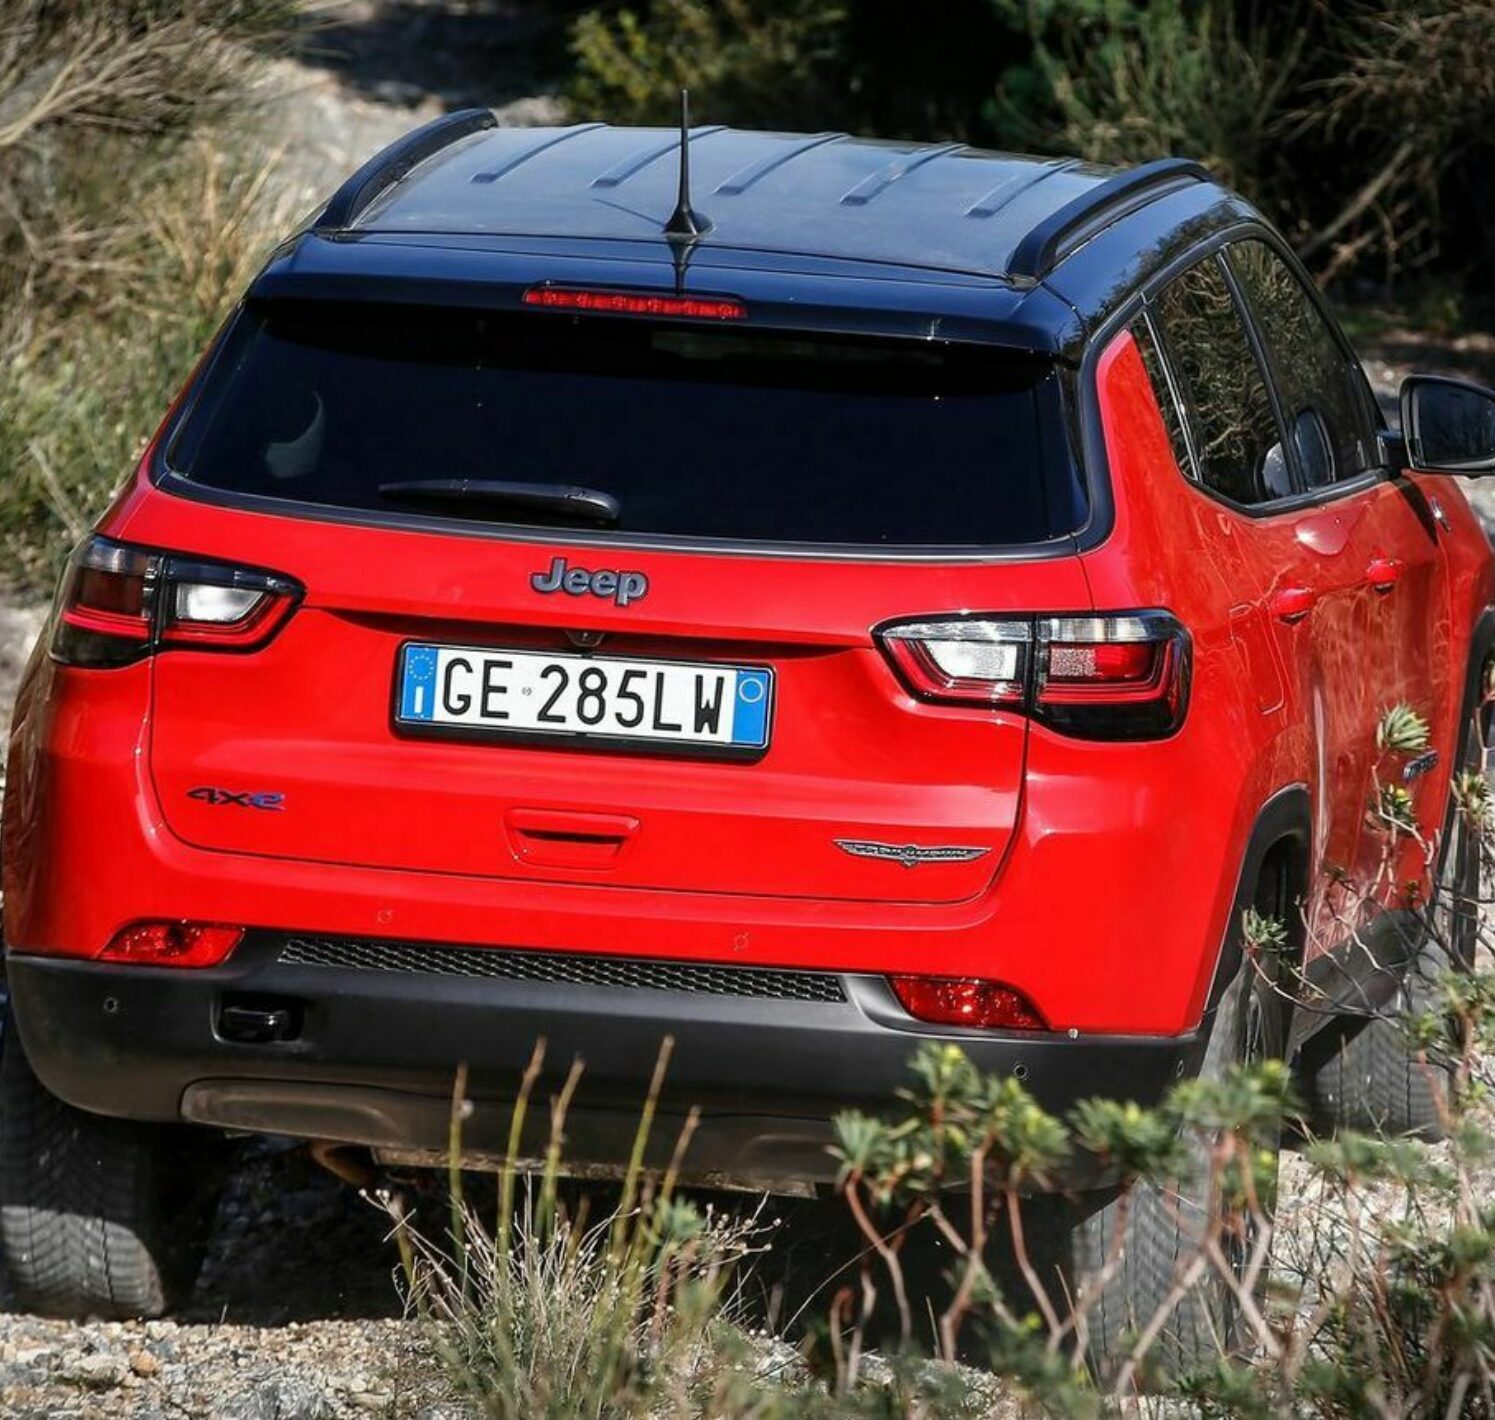 https://autofilter.sk/assets/images/compass/gallery/jeep-compass-2021_20-galeria.jpg - obrazok